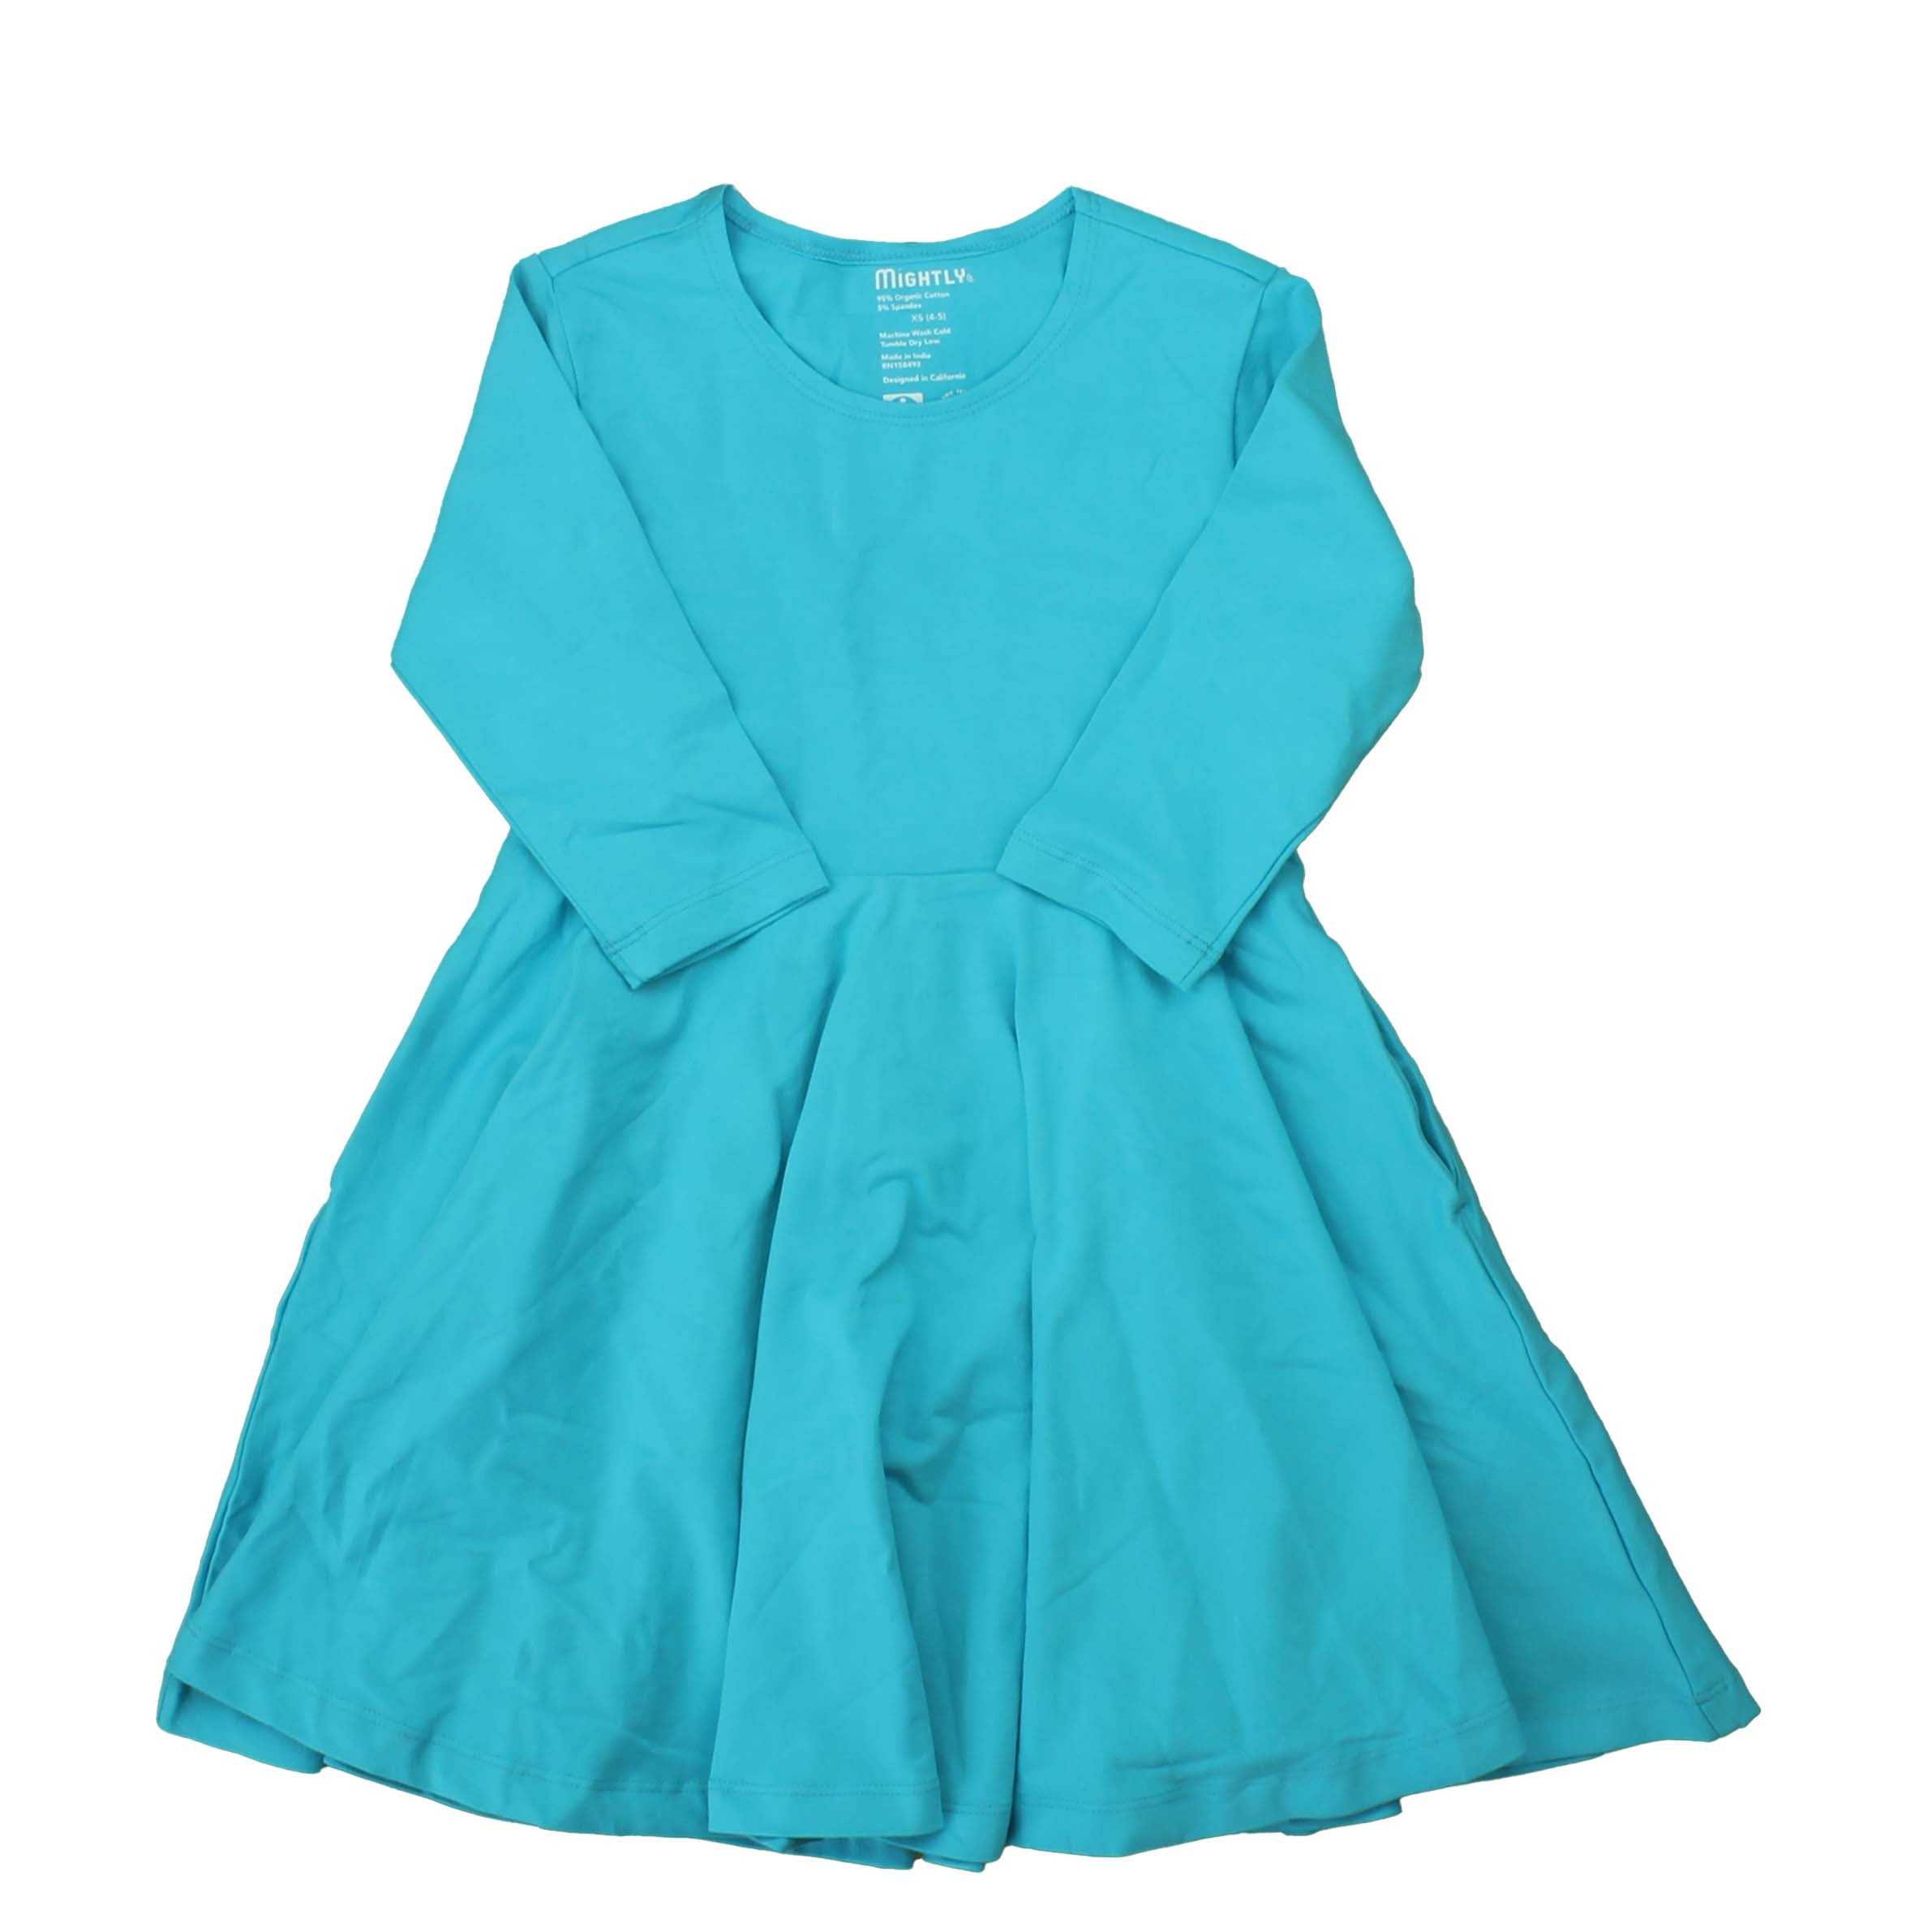 Pre-owned Turqouise Dress size: 4-5T